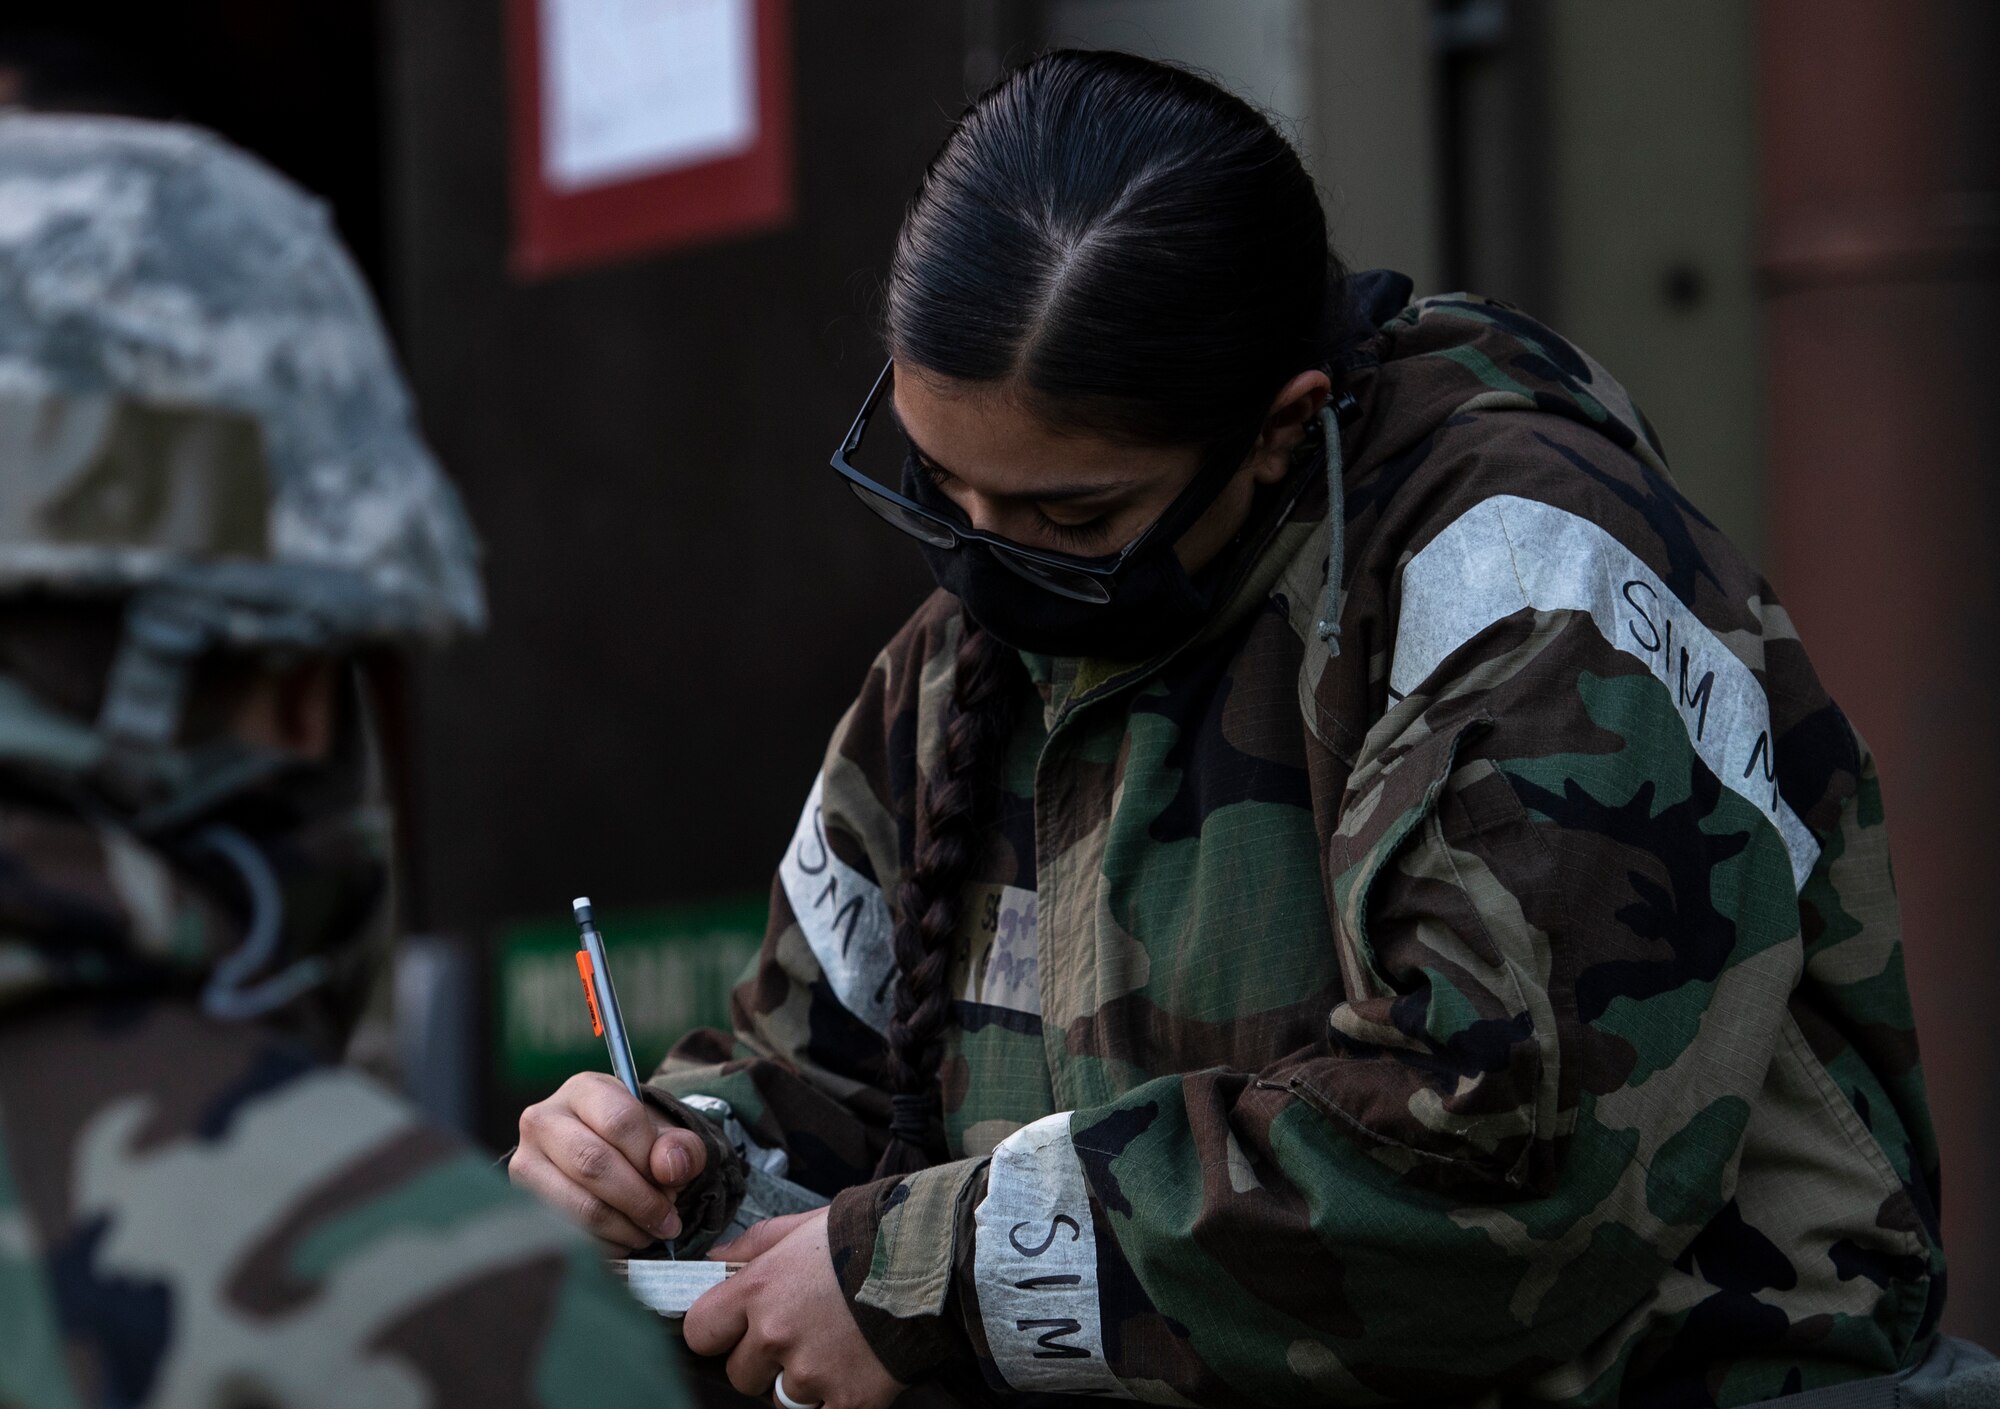 A U.S. Air Force Staff Sgt. Rebecca Garcia, 48th Civil Engineering Squadron engineering craftsman, prepares for post-attack reconnaissance sweeps during a readiness training at Royal Air Force Feltwell, Nov. 4, 2020. CES Airmen must maintain the ability to operate in all contingency environments through teamwork and practical application. (U.S. Air Force photo by Airman 1st Class Jessi Monte)